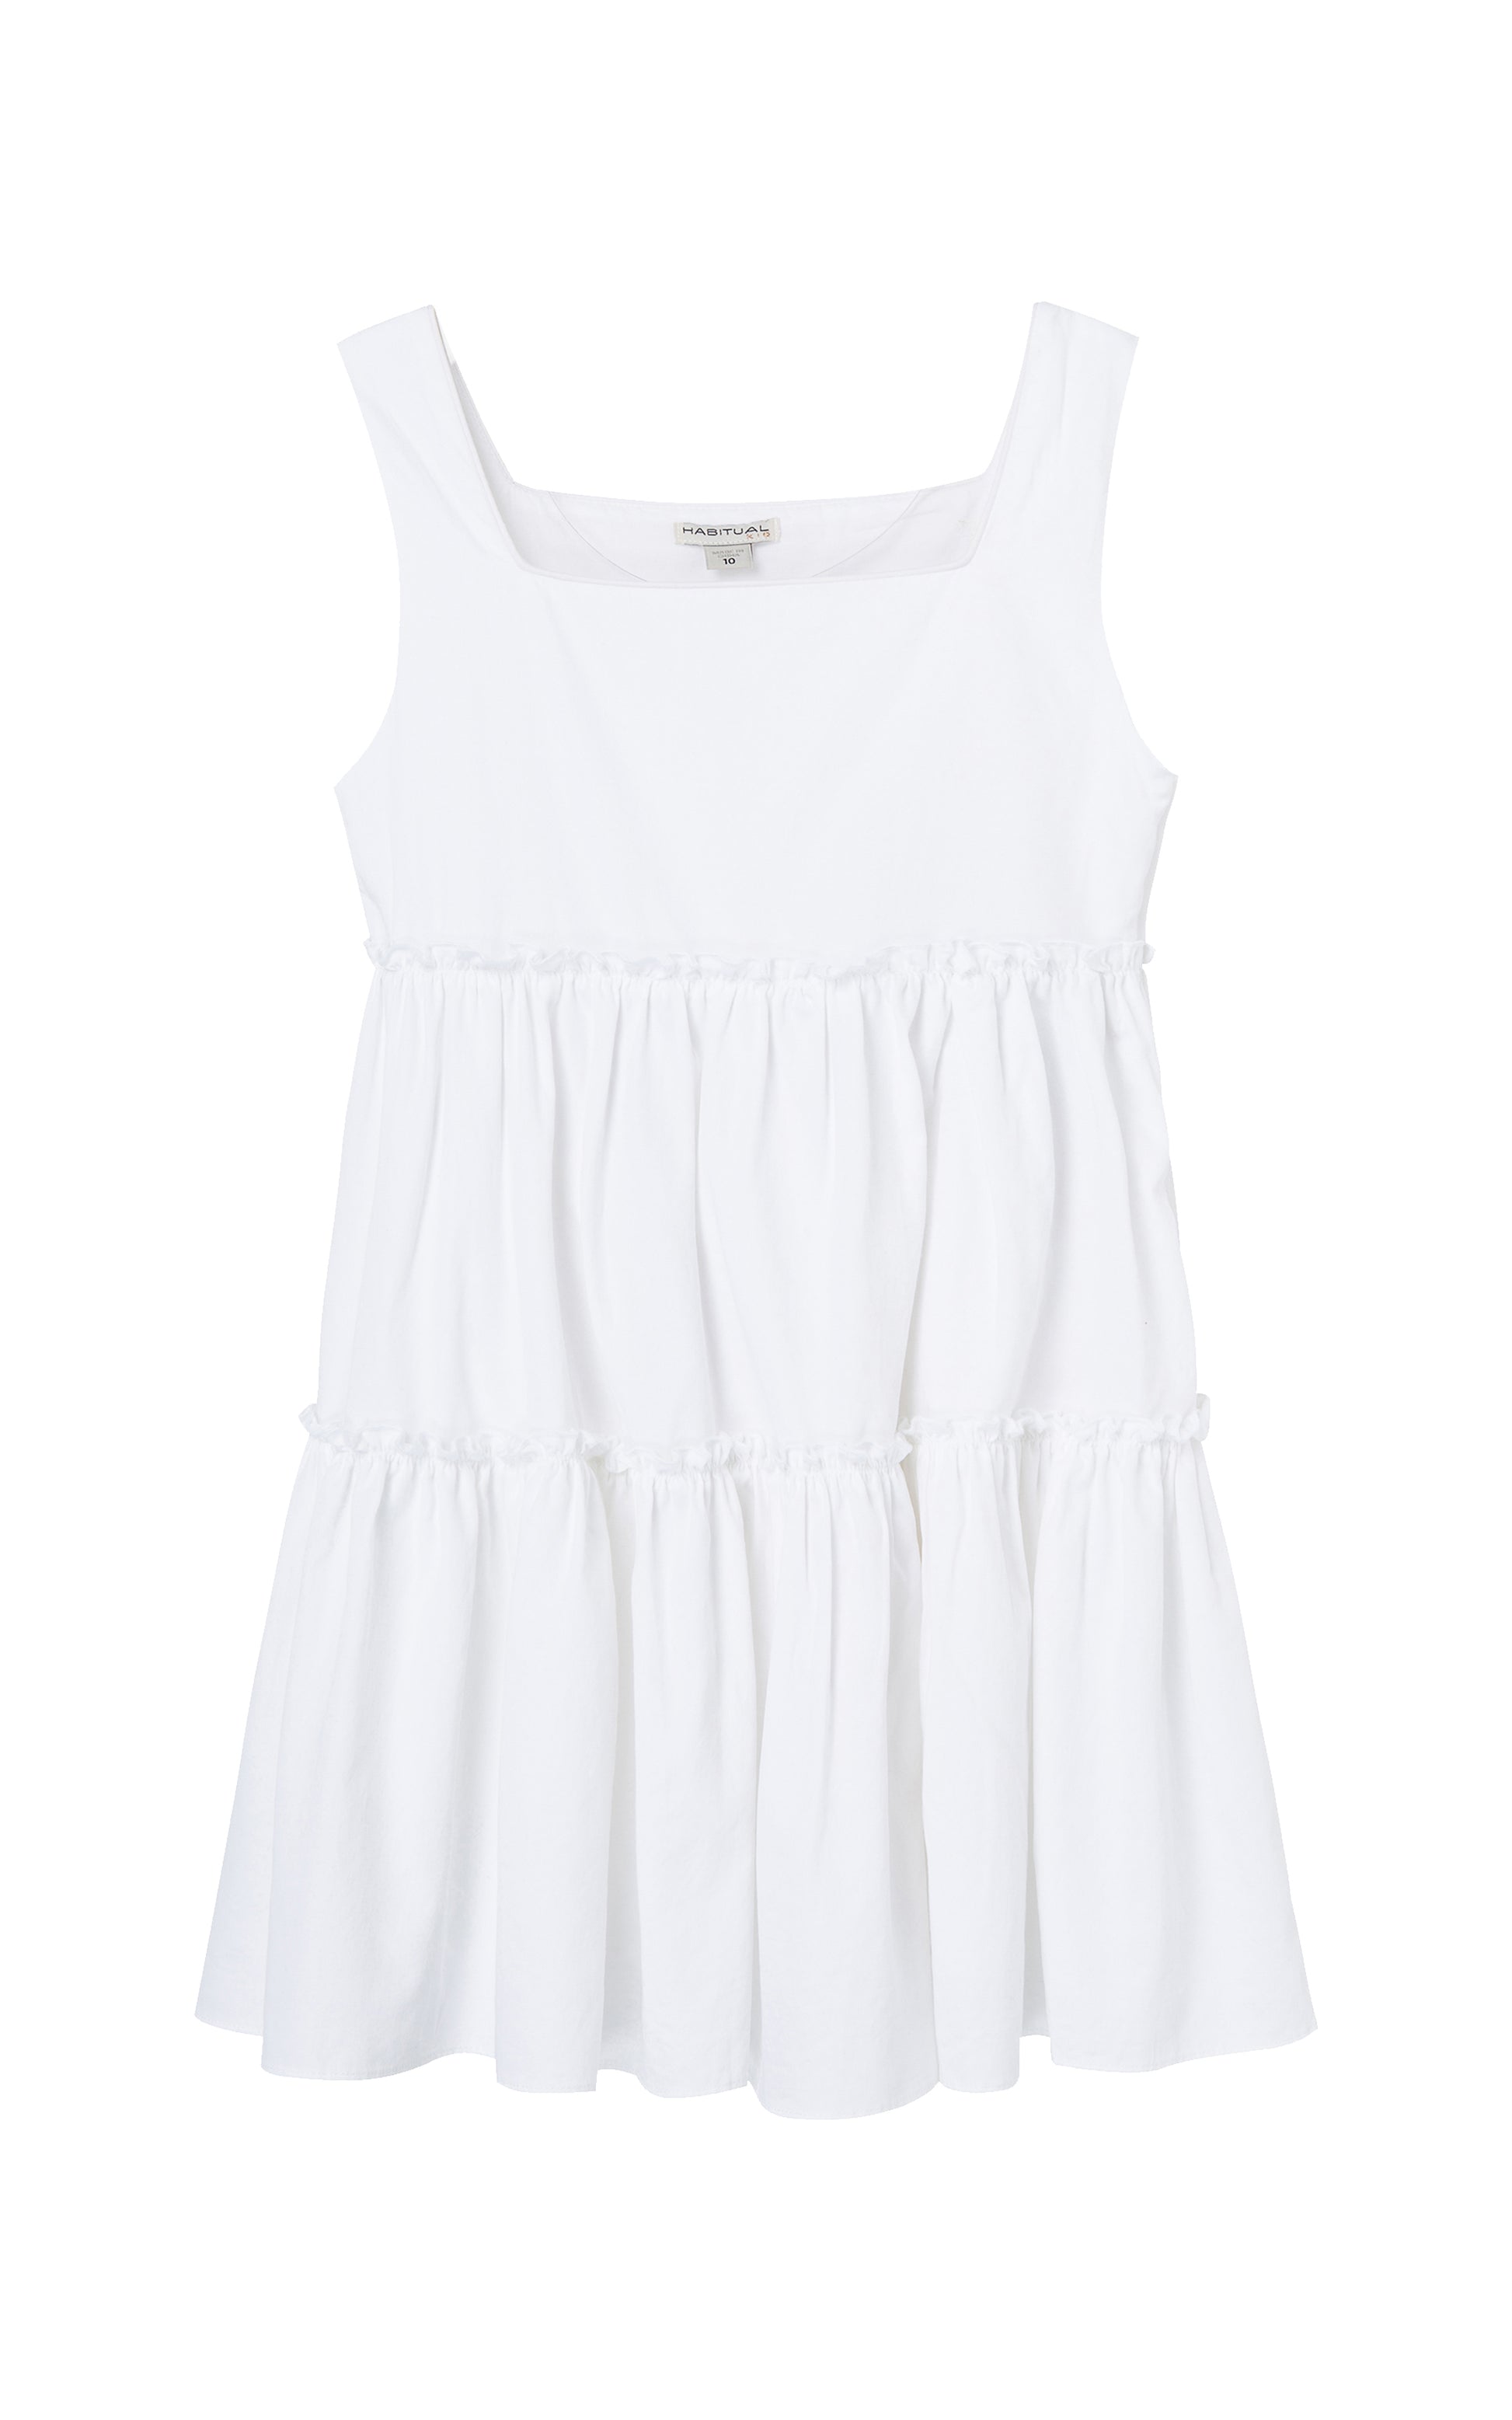 White tiered baby doll dress